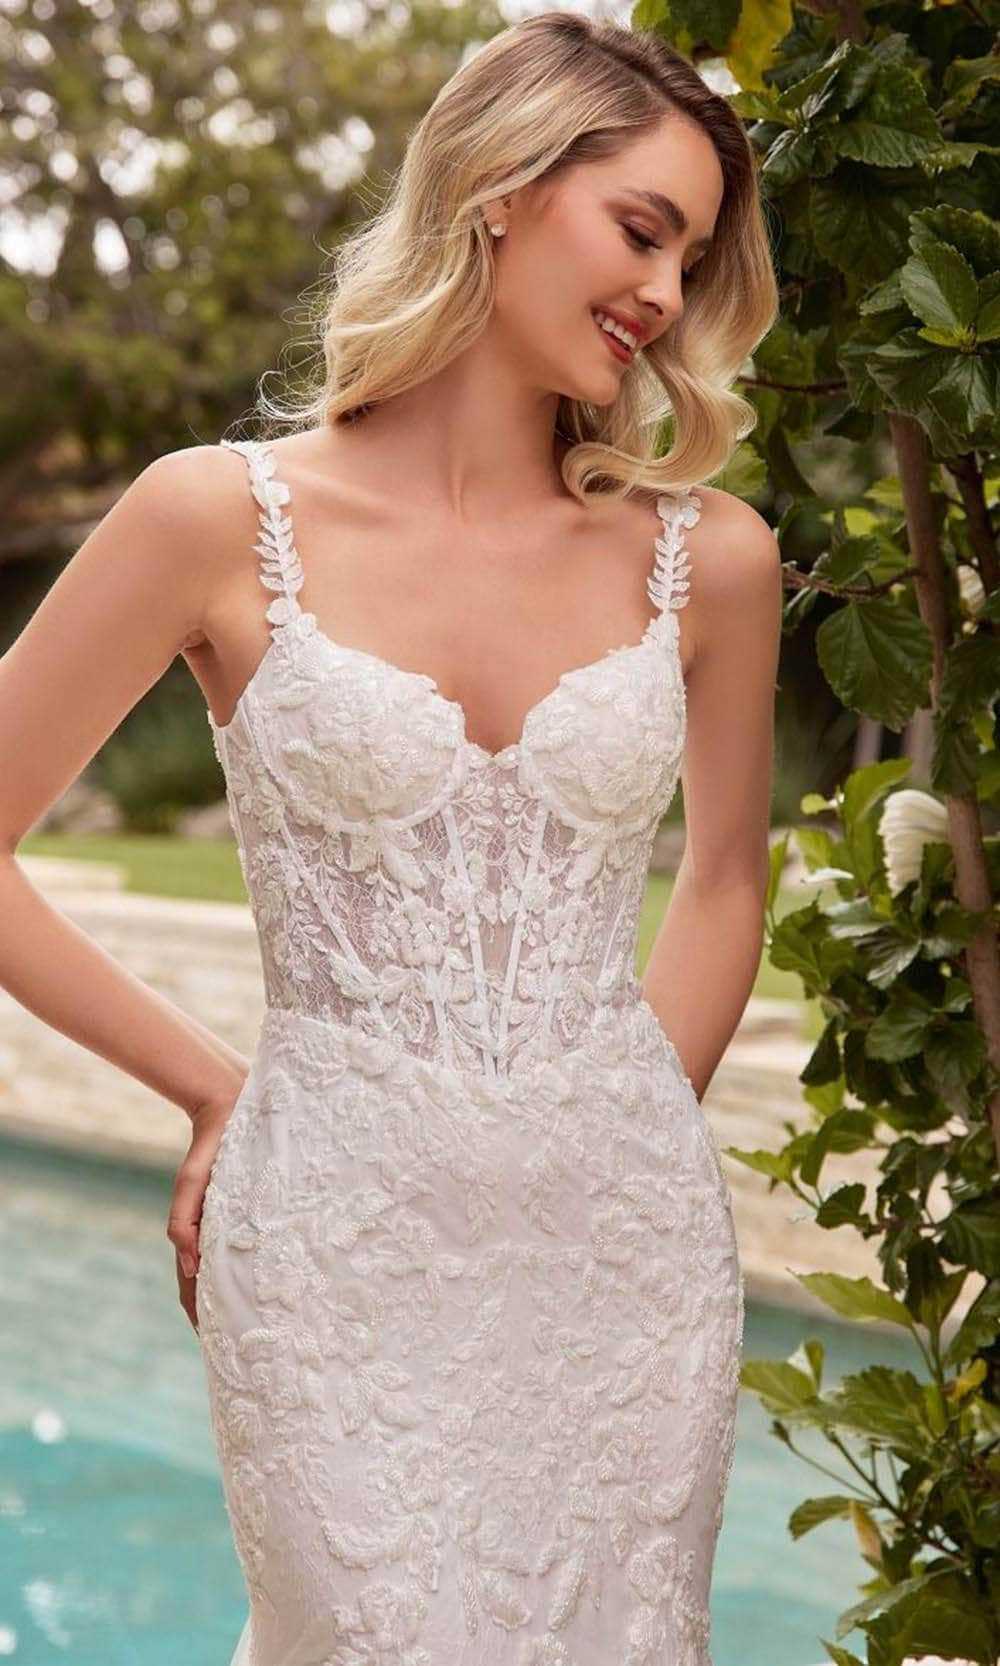 Ladivine, Ladivine CDS432W - Lace Sleeveless Bridal Gown